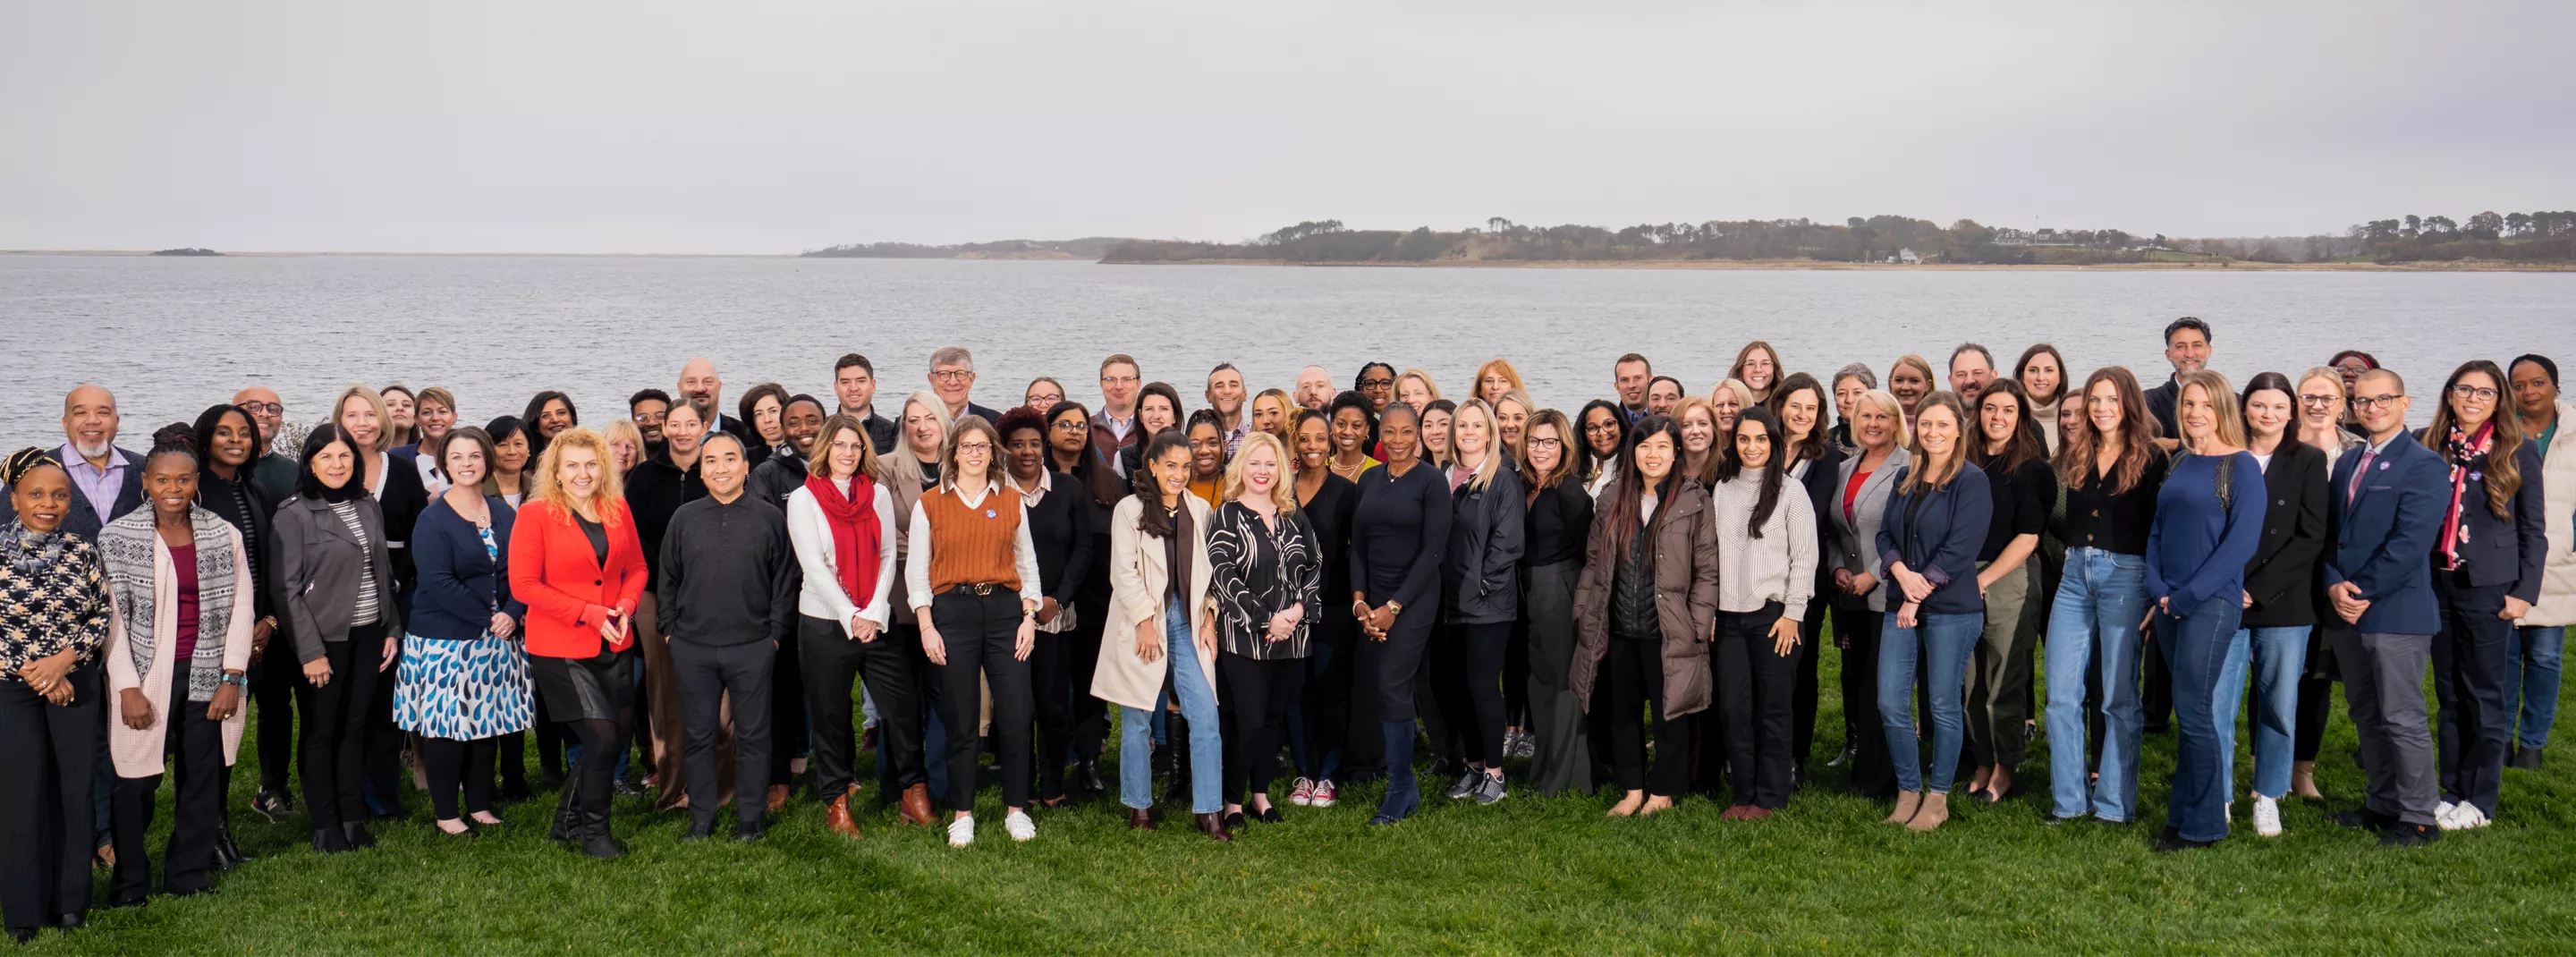 CareQuest Institute staff pose in front of ocean at staff retreat